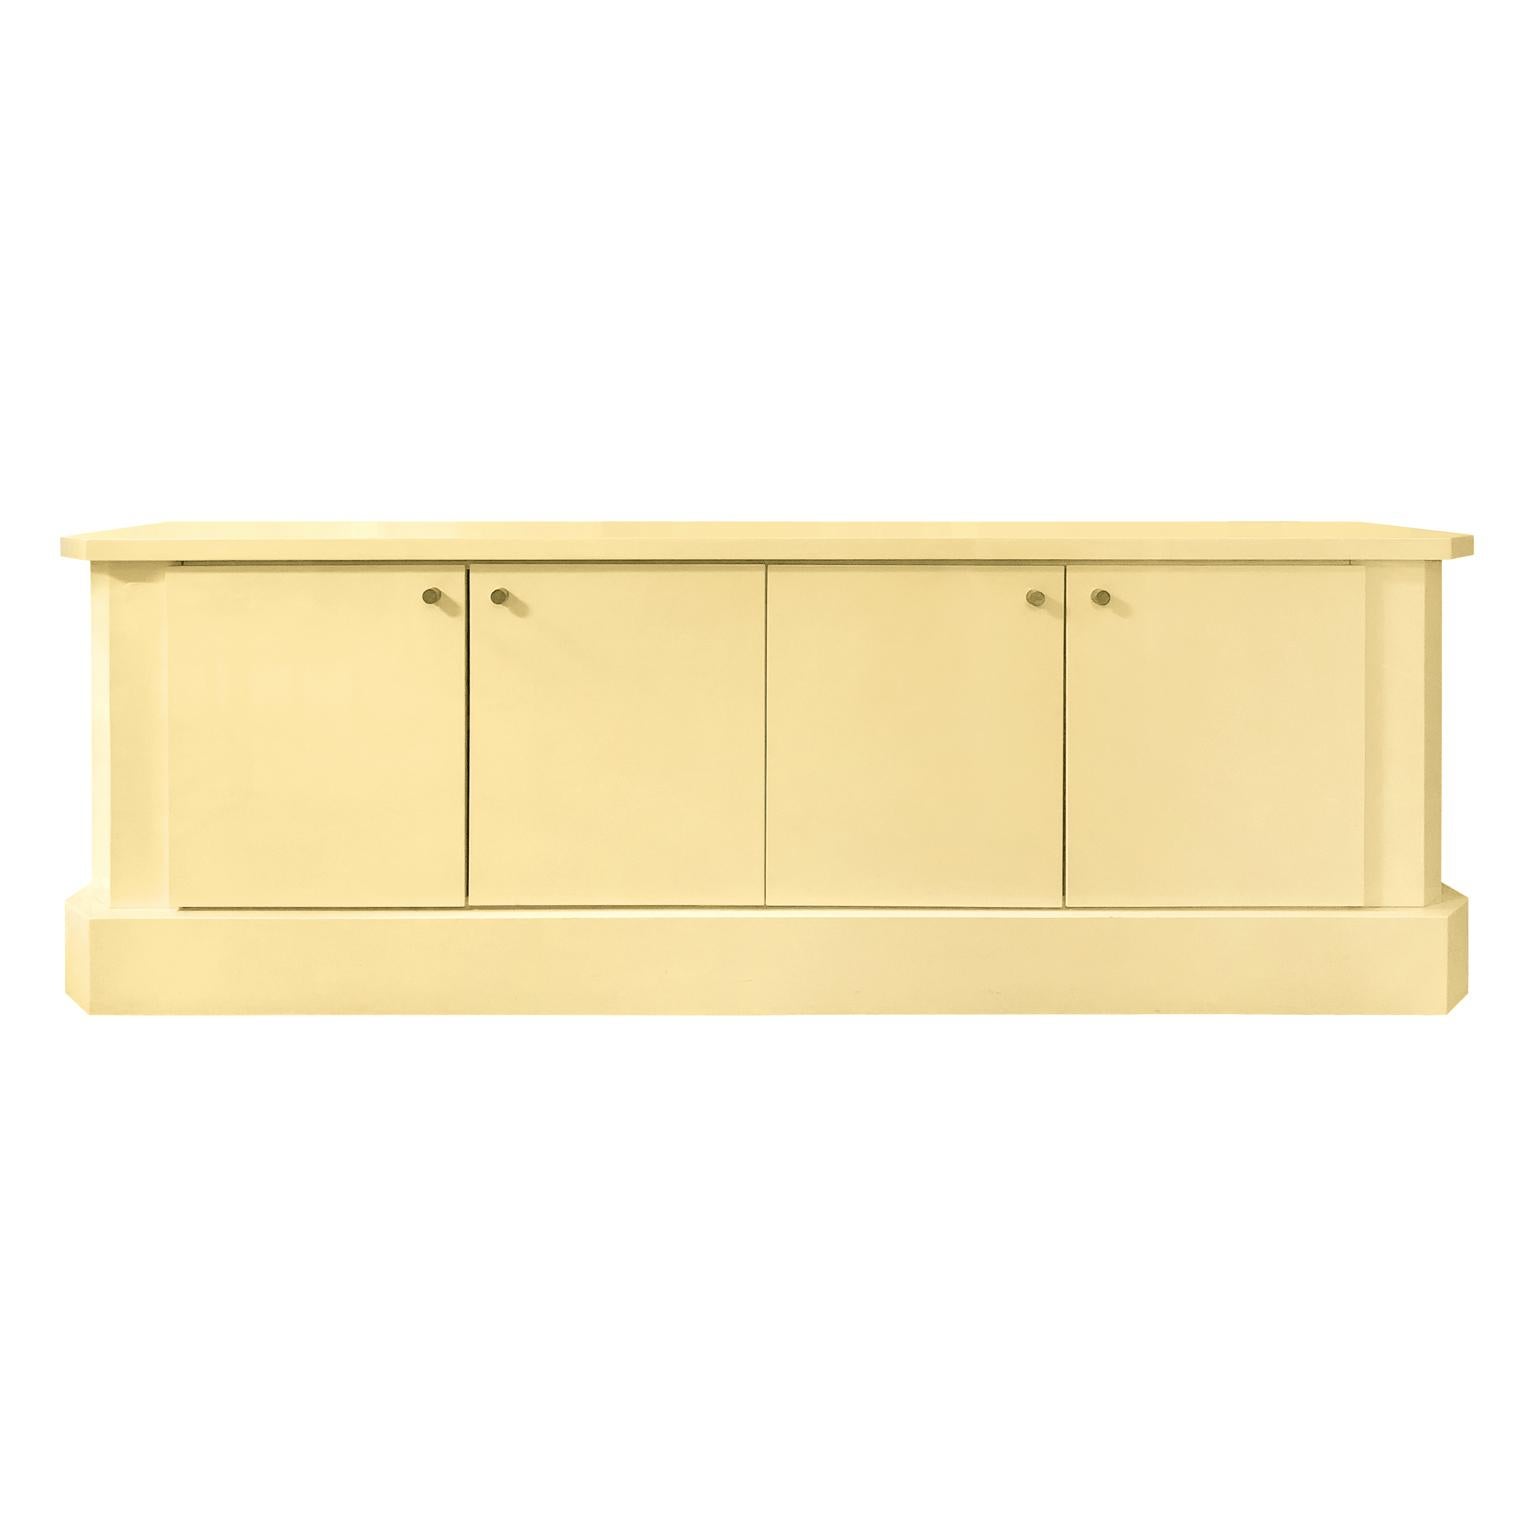 1970s French Ivory Lacquer Sideboard by Jean Claude Dresse im Angebot